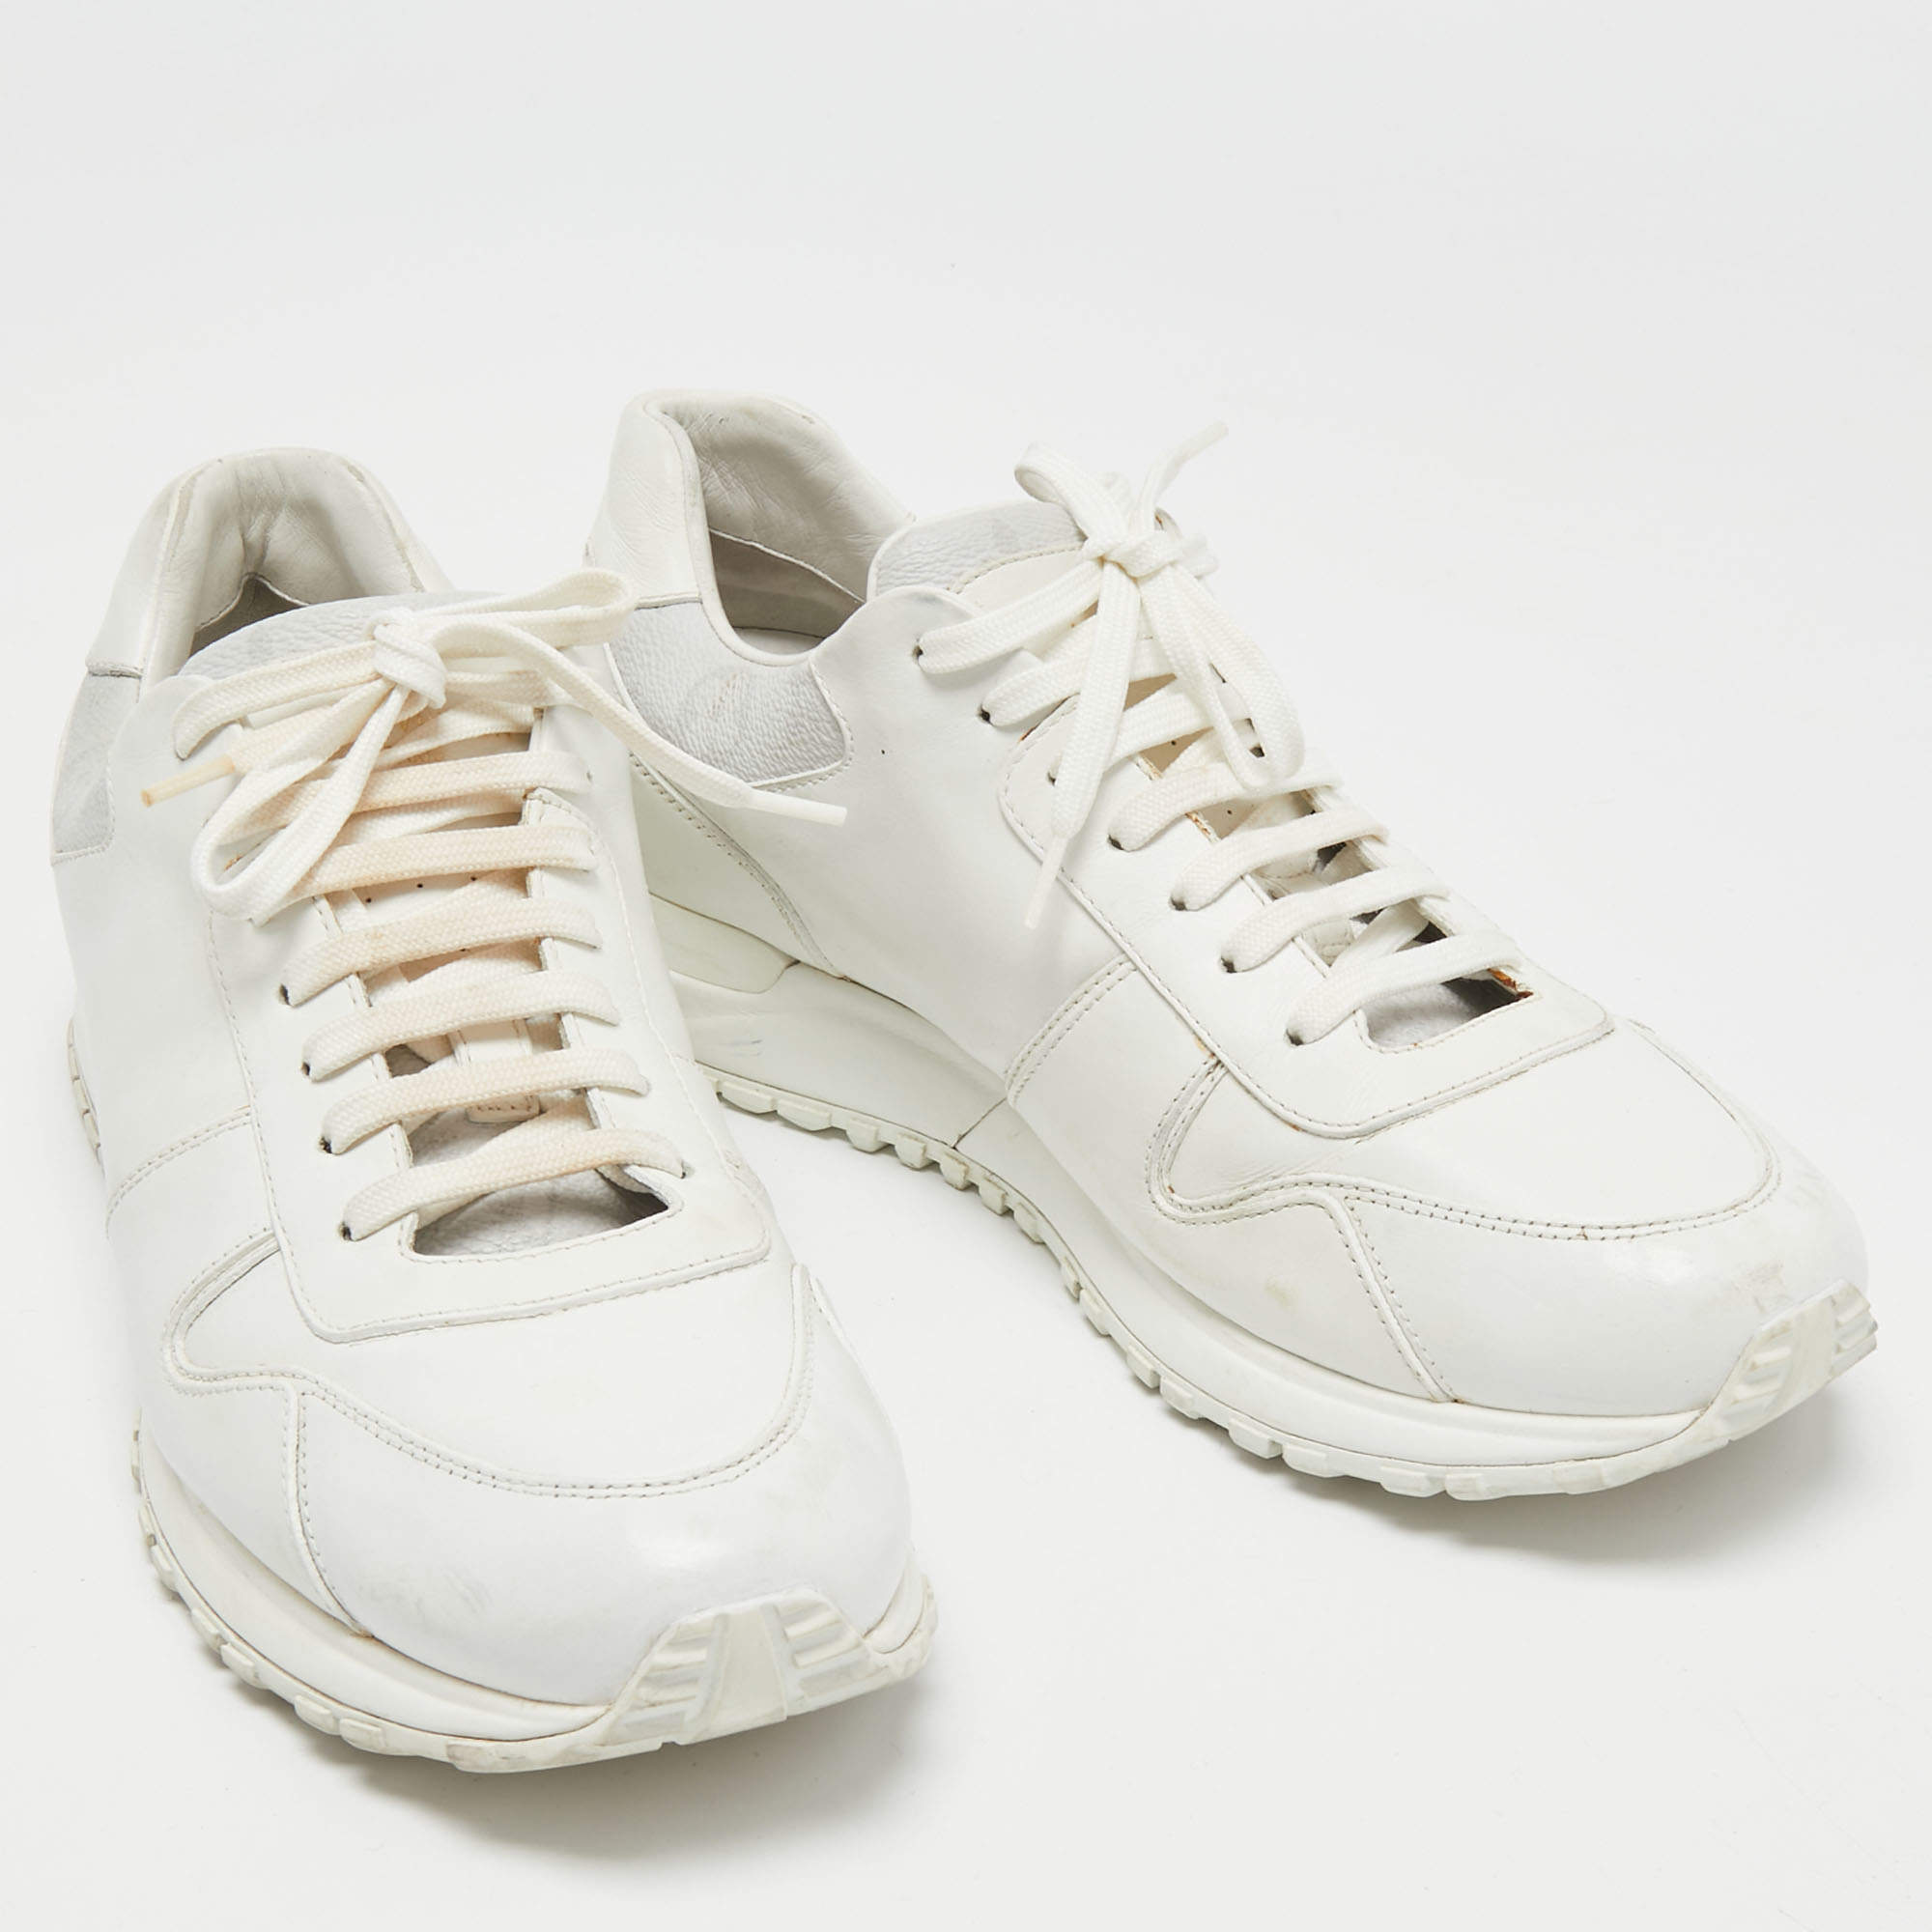 Run away leather trainers Louis Vuitton White size 37 EU in Leather -  34247451